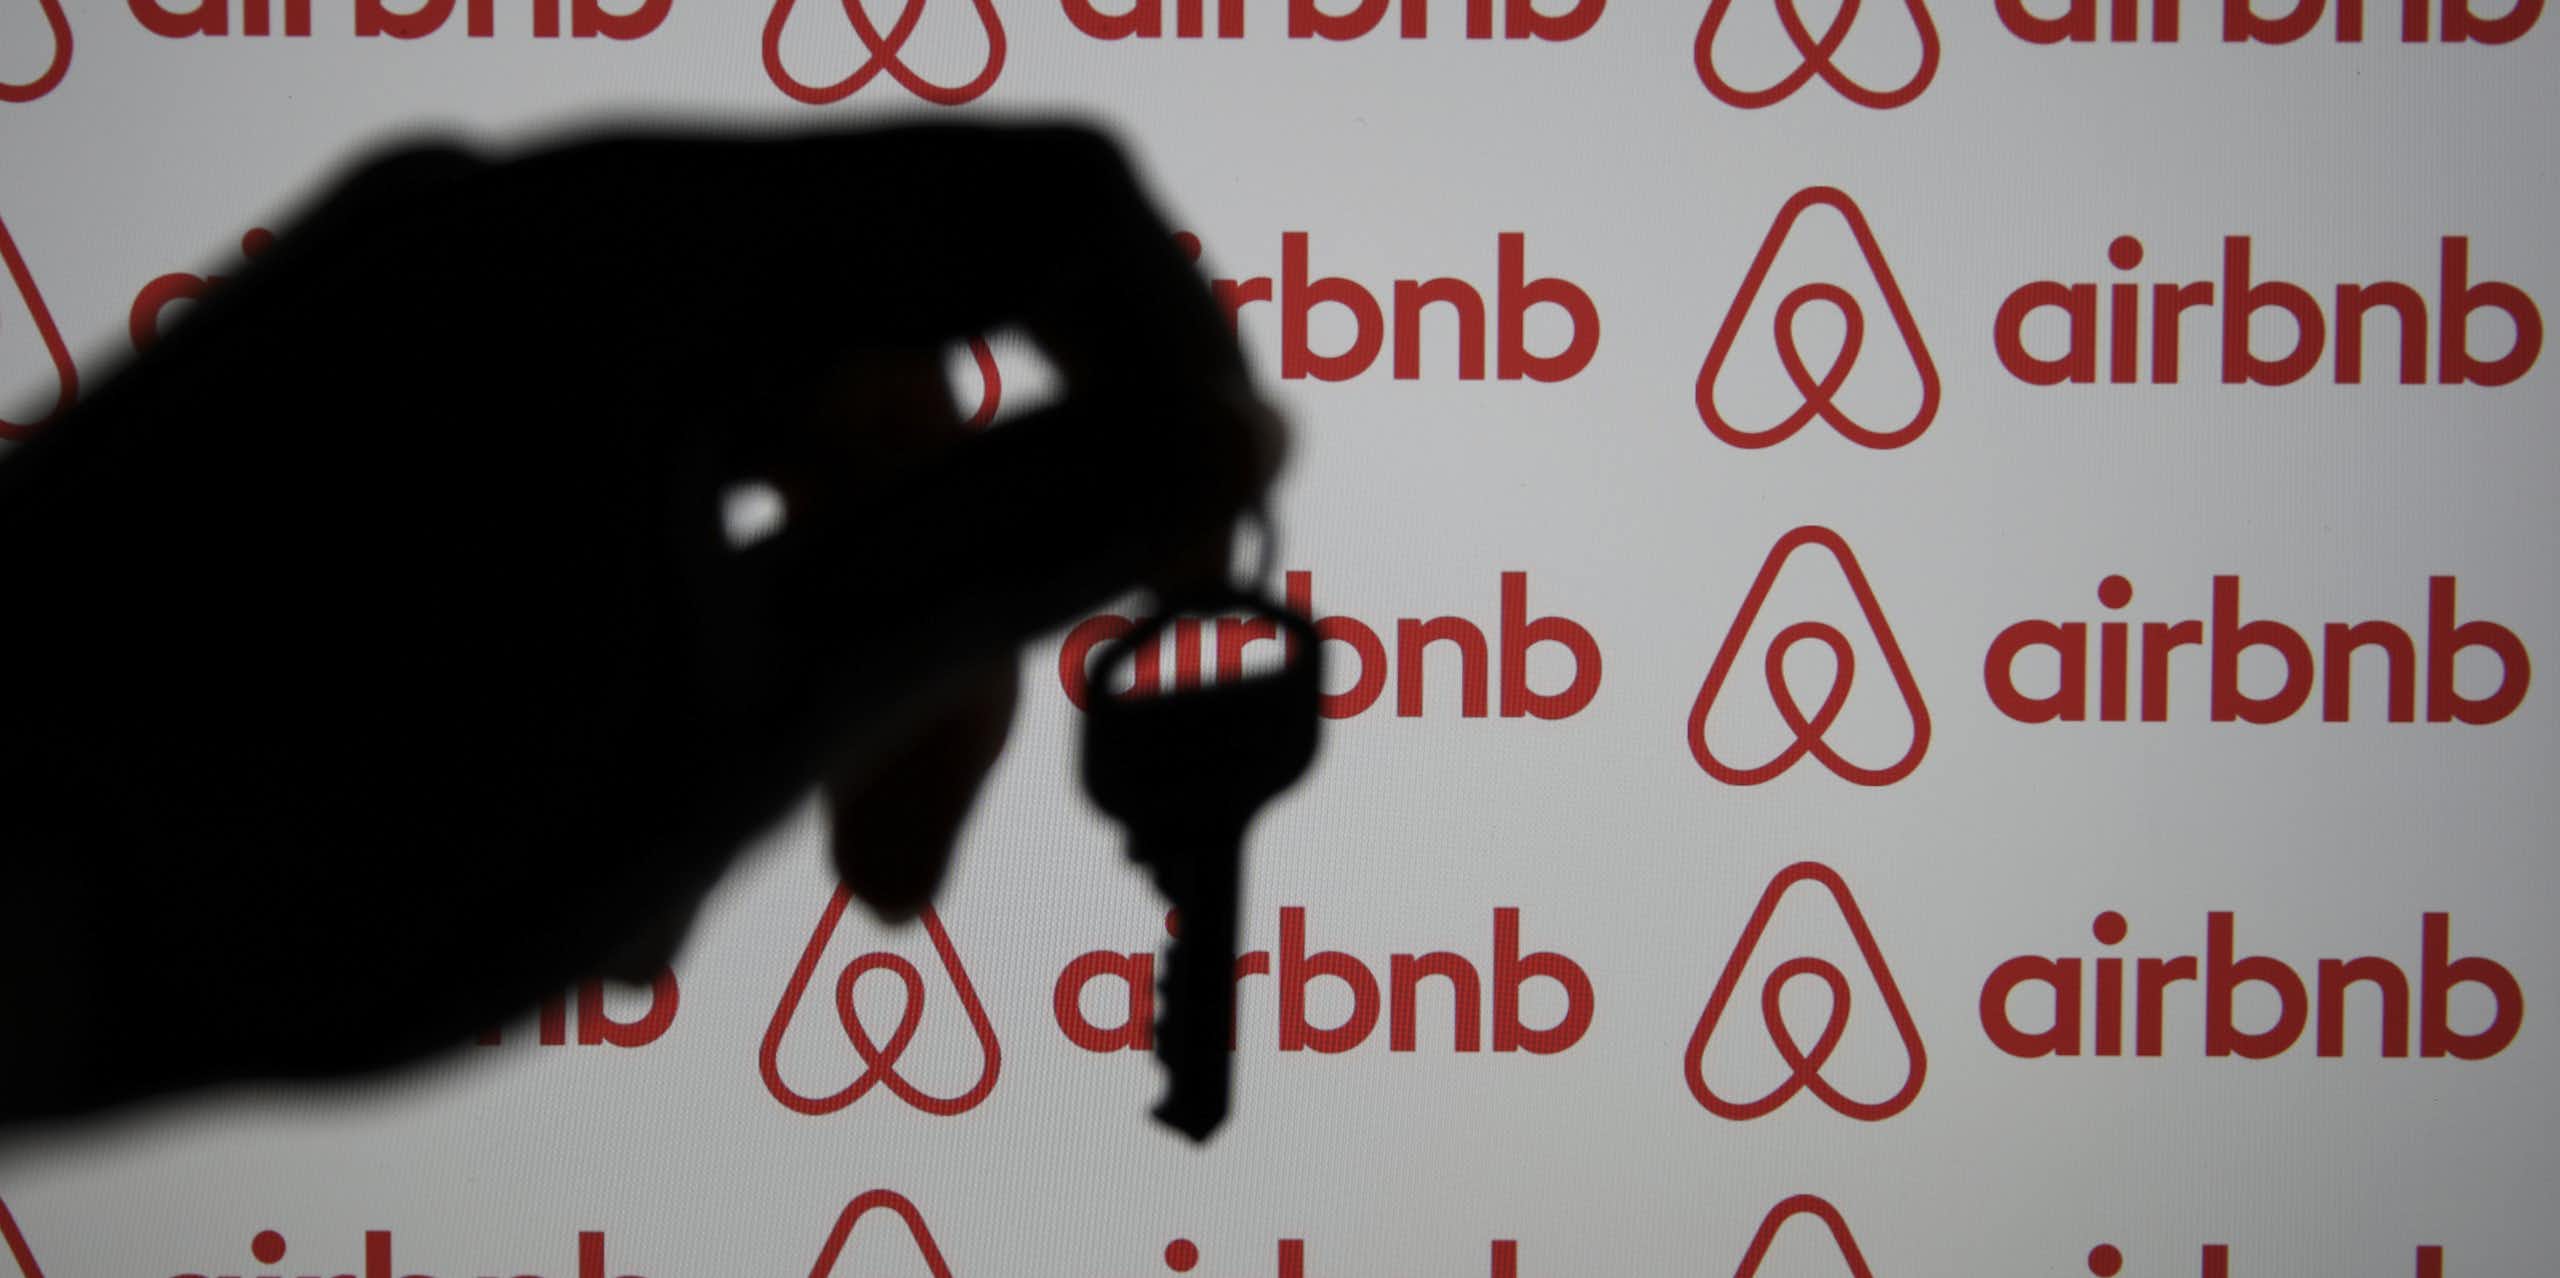 A hand is seen holding a key in silhouette before a computer screen displaying the Airbnb logo